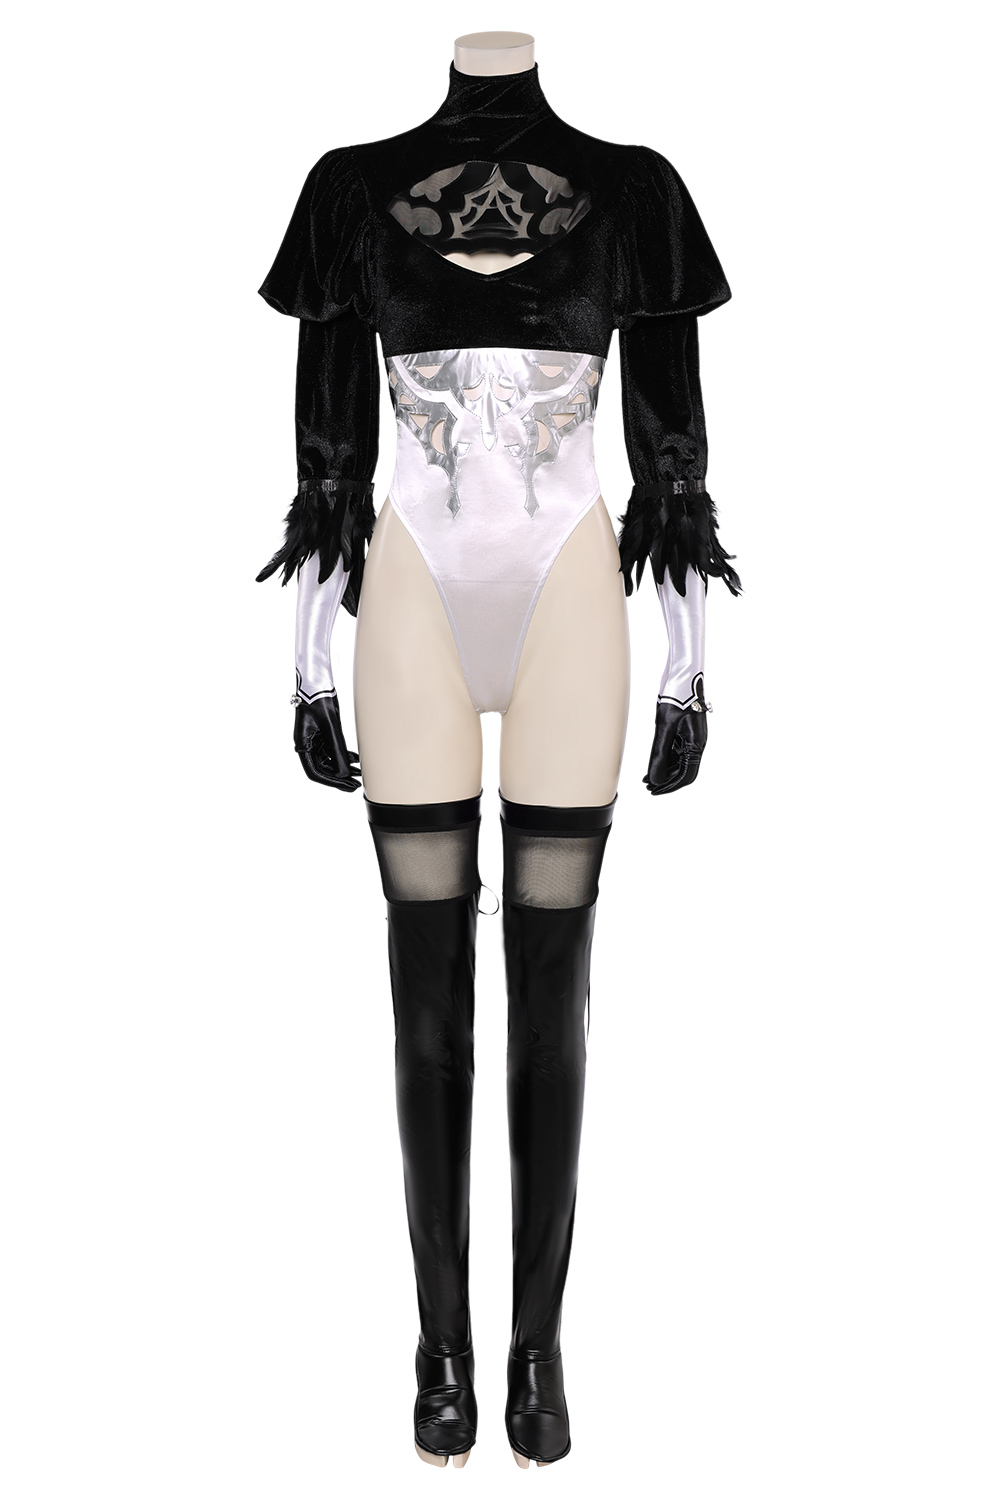 TV NieR: Automata Ver 1.1a No2 Type B Sexy Jumpsuit Outfits Halloween Carnival Suit Cosplay Costume